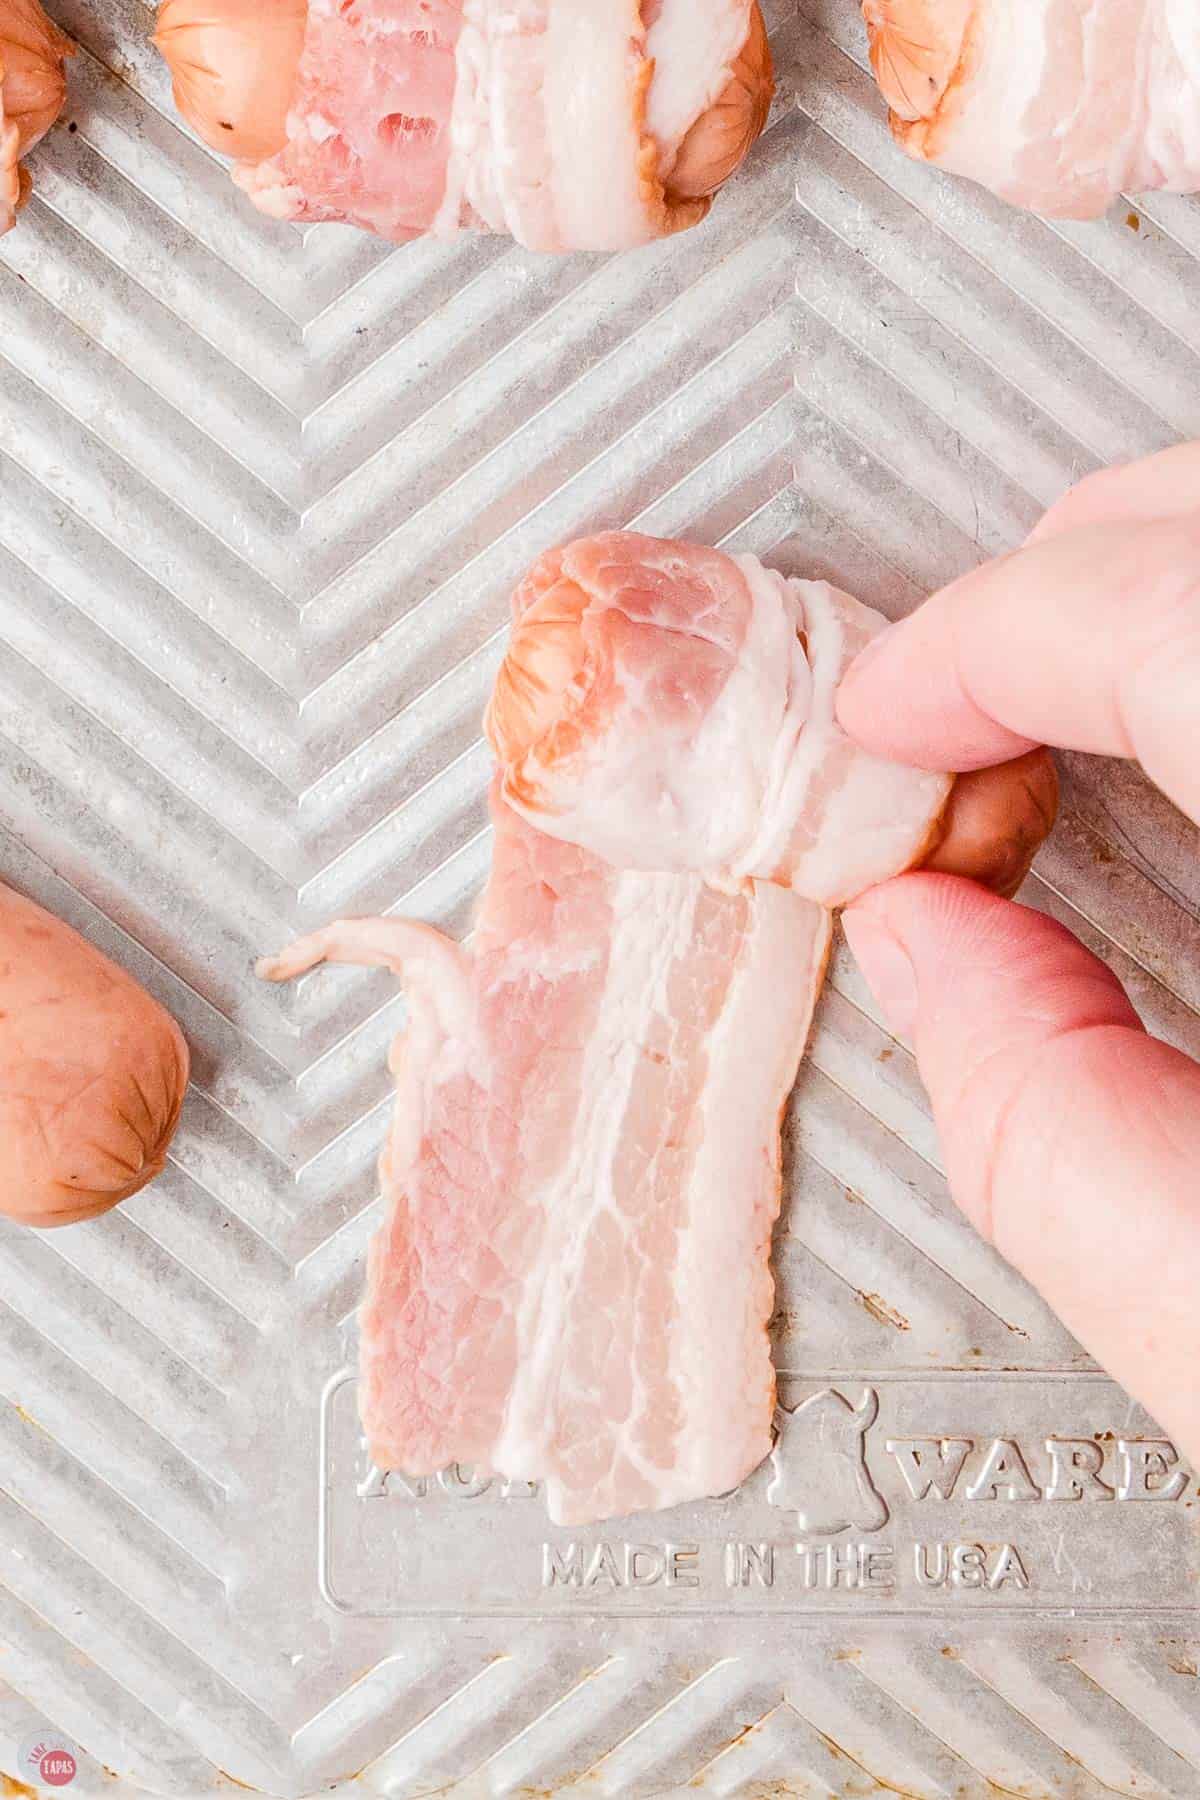 hand wrapping bacon around a little sausage